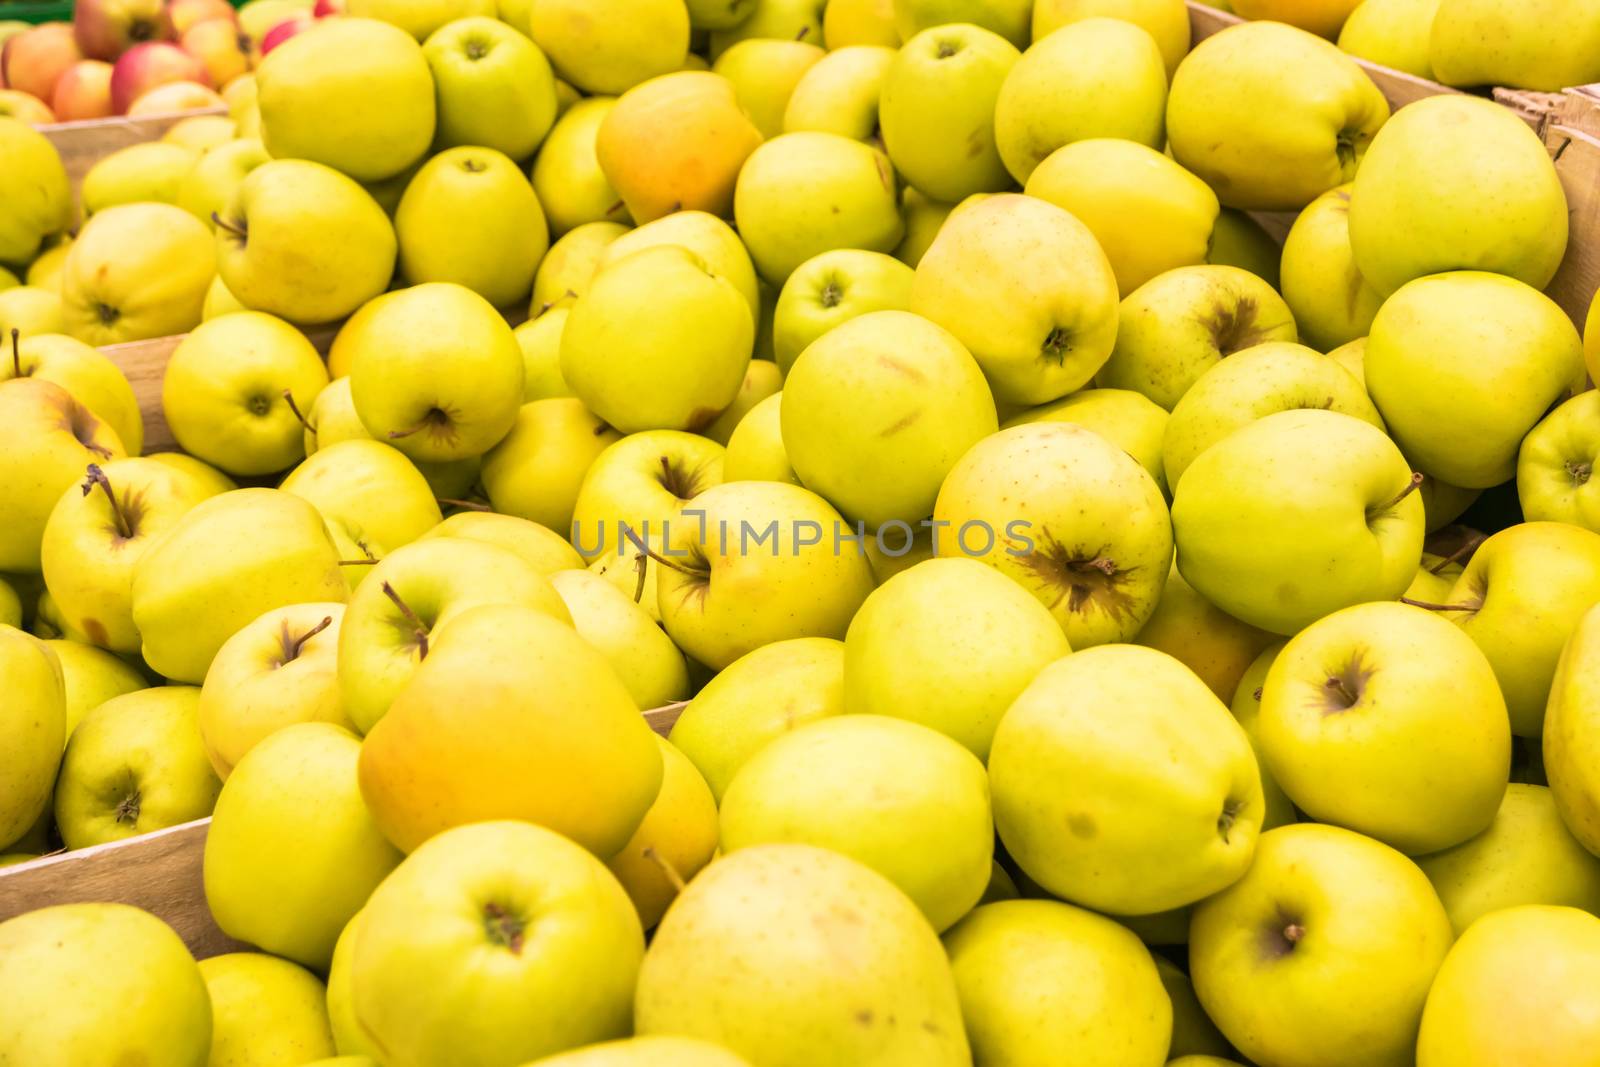 Red and yellow fresh apples by vapi